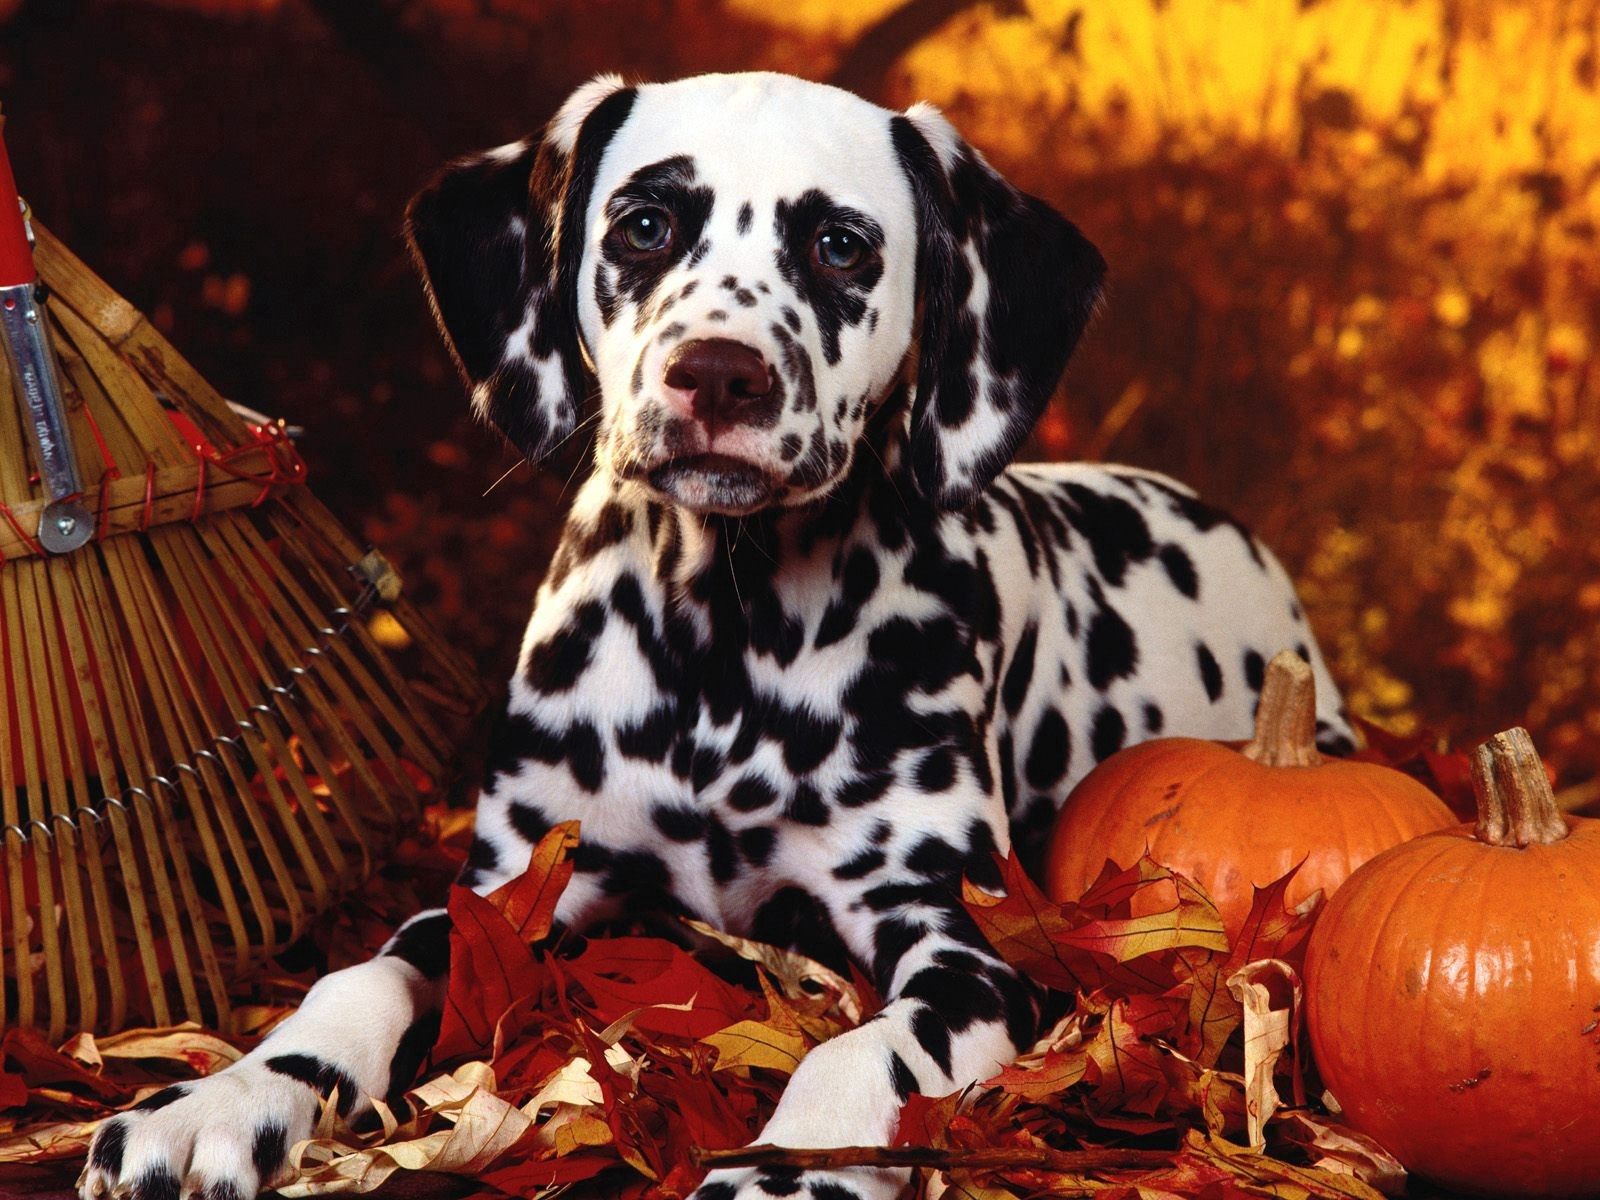 Mobile wallpaper: Halloween, Animals, Pumpkin, Sit, Dog, Foliage, Dalmatian, Dalmatians, Breed, 50708 download the picture for free